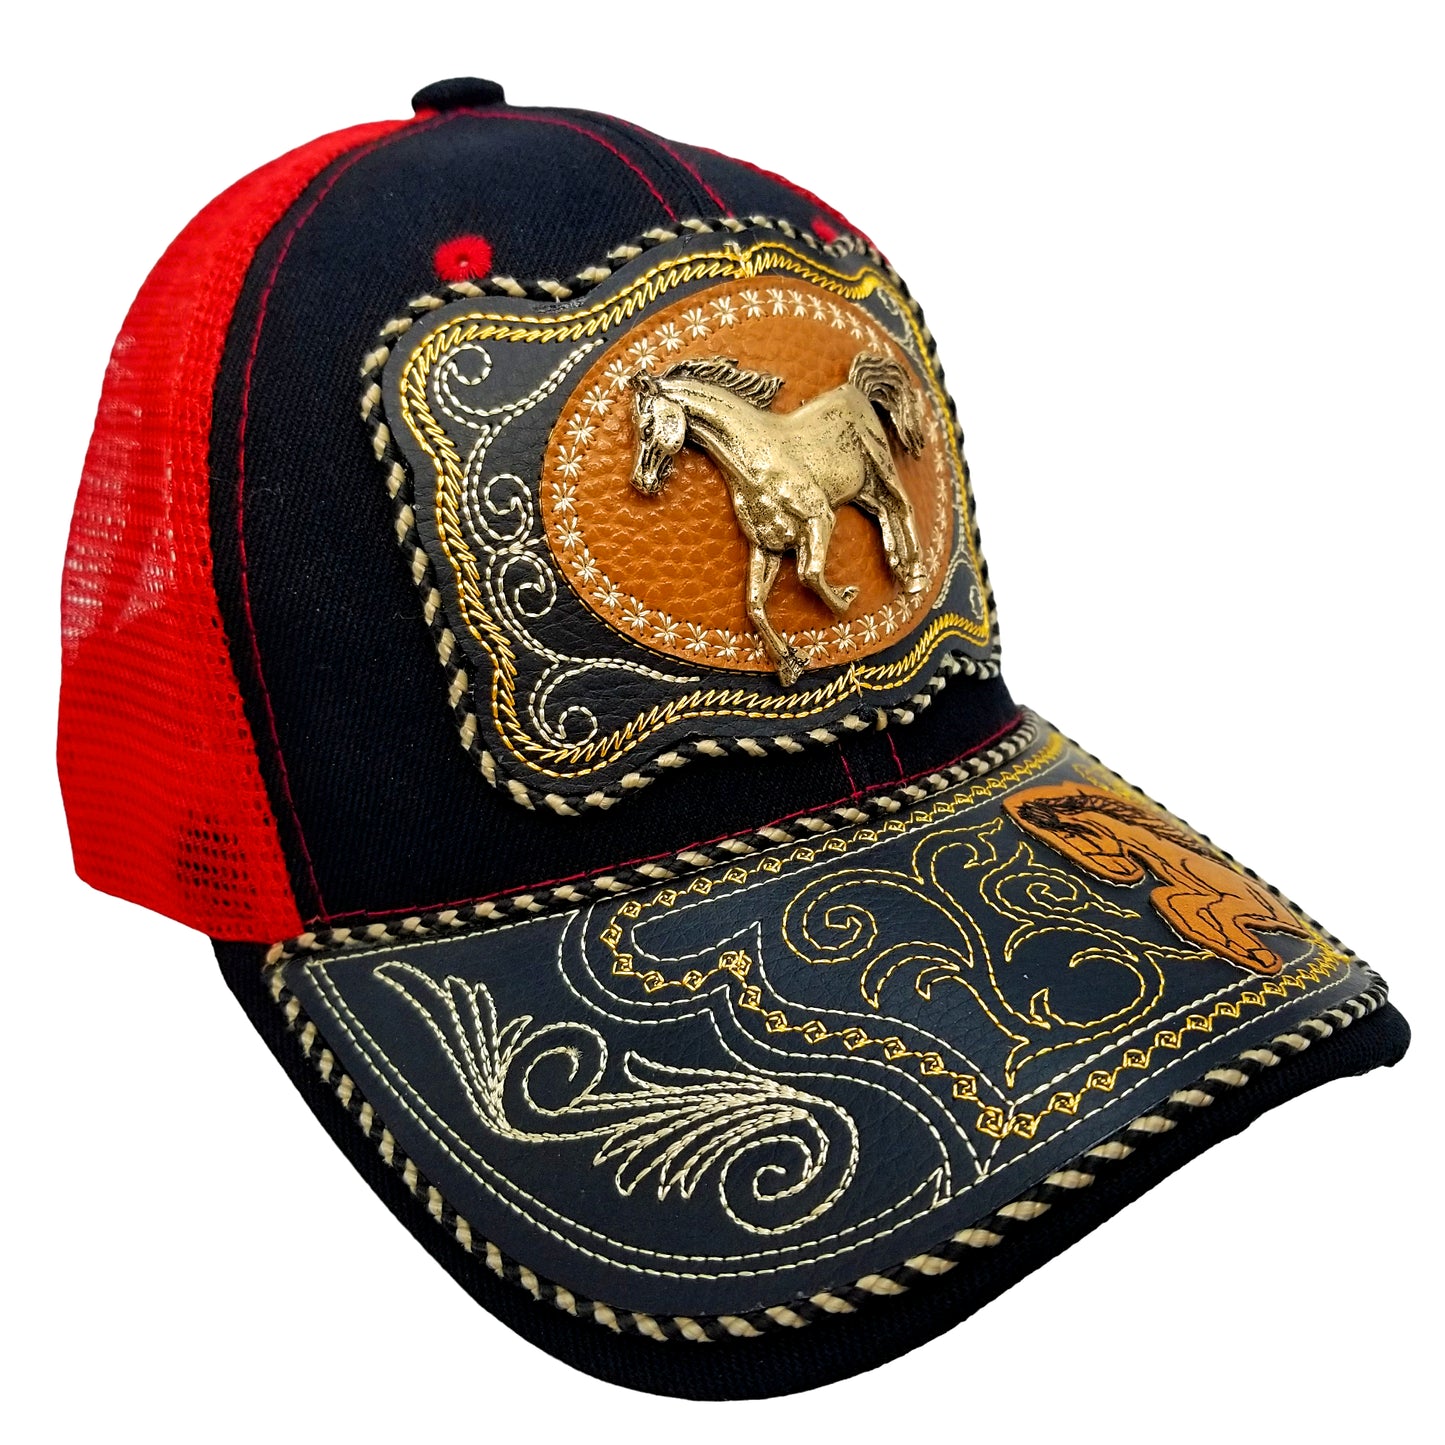 CASQUETTE - COUNTRY URBAIN - 27 - CHEVAL - ONYX ET ROUGE